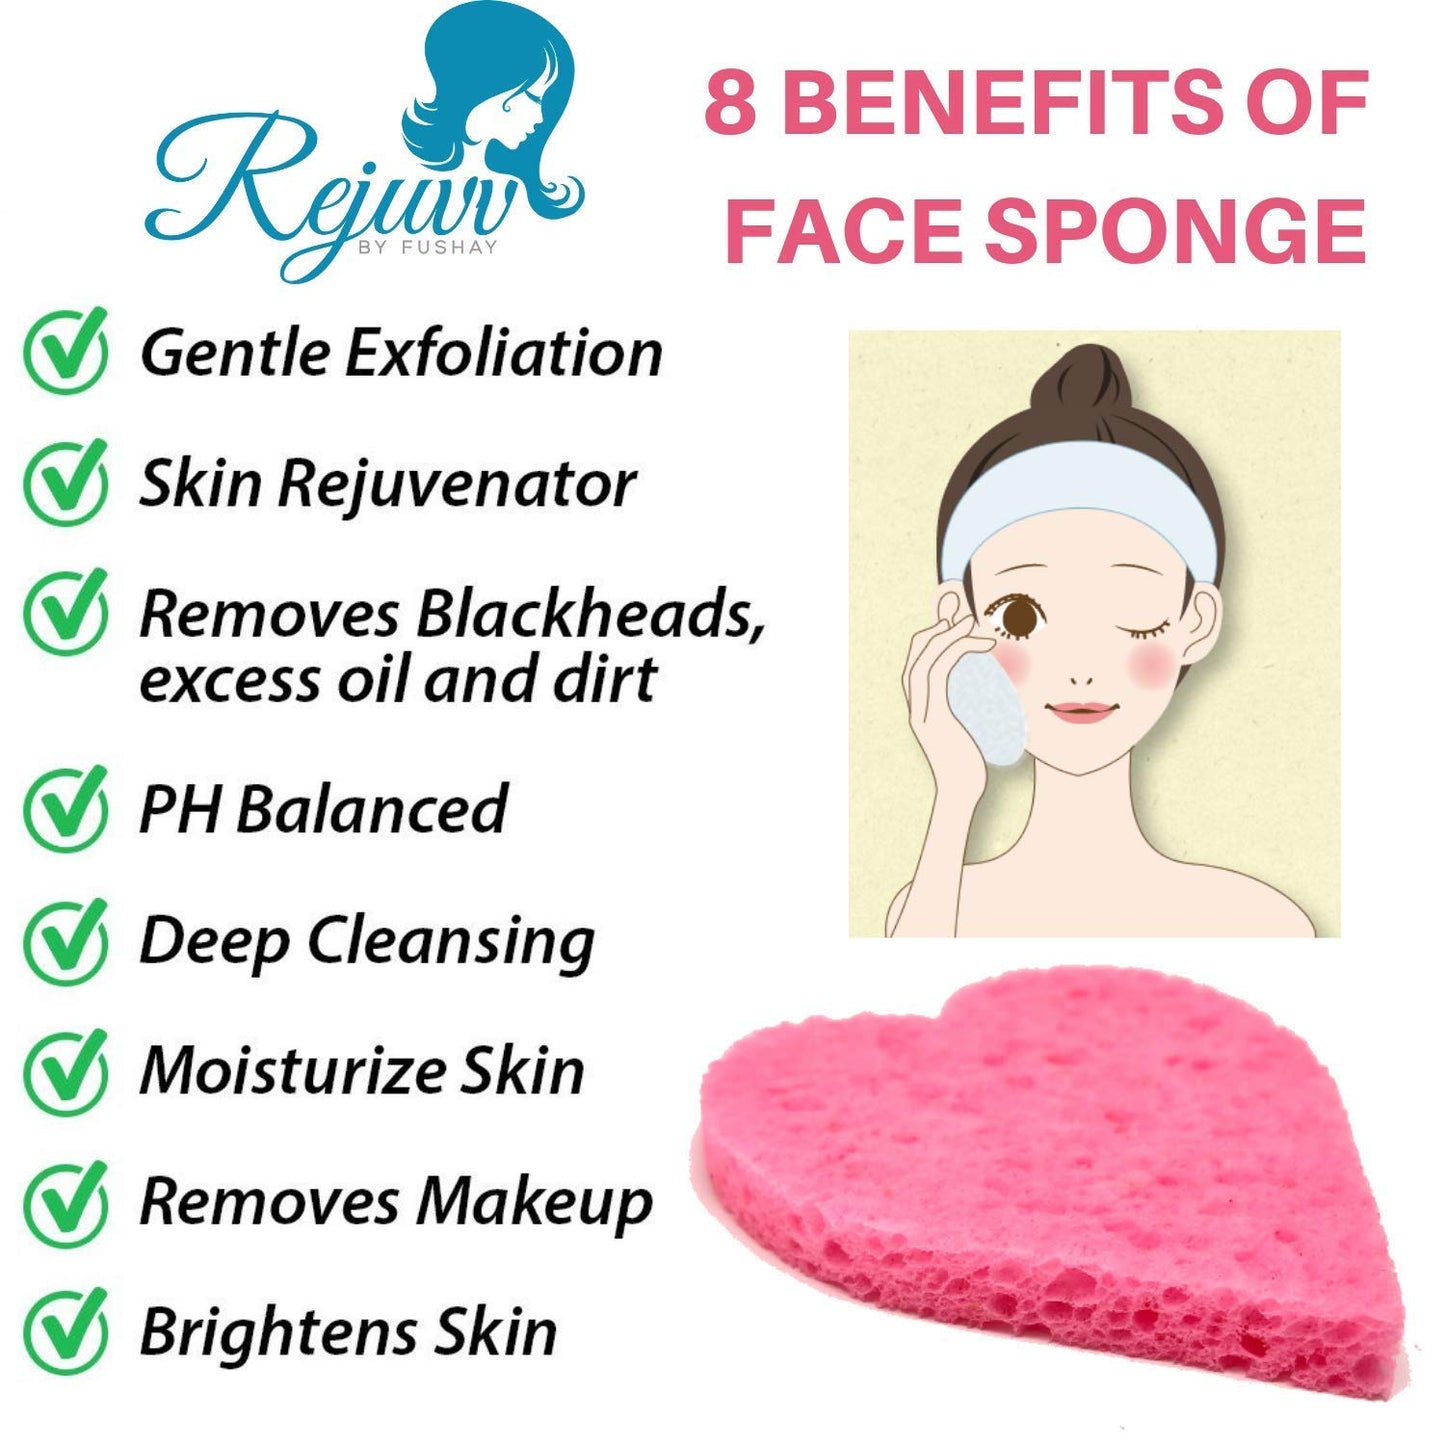 Facial Sponges Compressed Natural Cellulose Sponge for Face Cleansing Exfoliating and makeup removal, Professional use Deep clean - Rejuvv by Fushay (50 Count (Pack of 1))